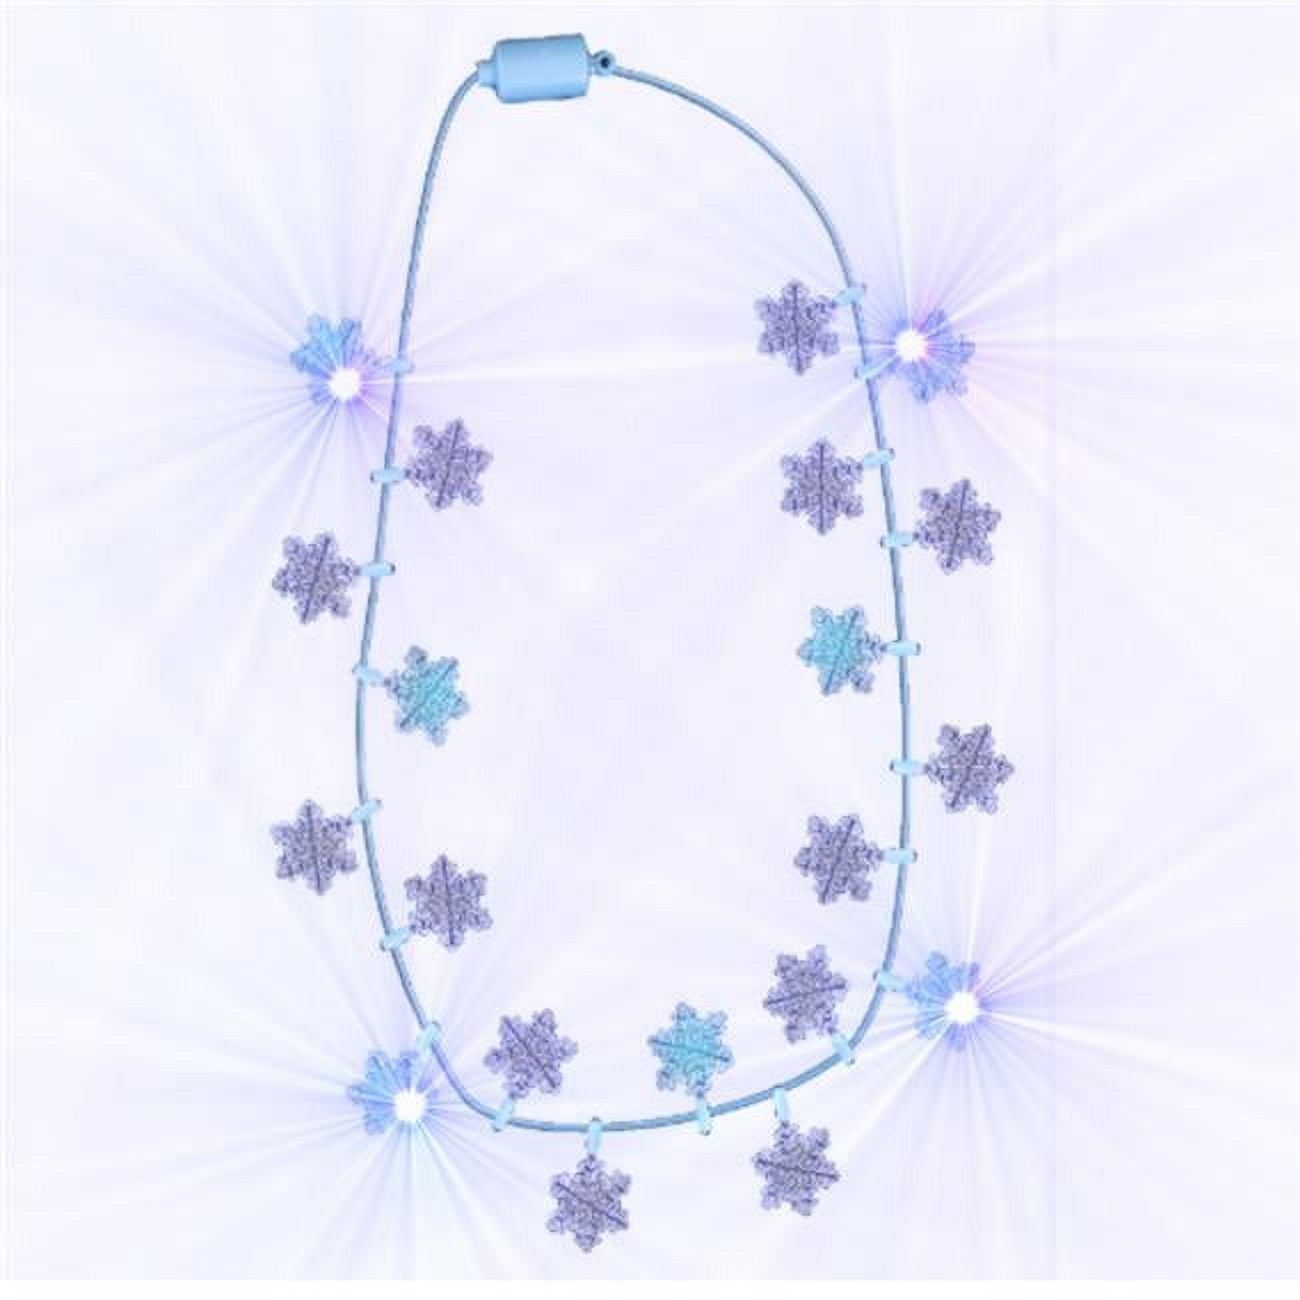 Picture of Blinkee 280030 Snowflake String Lights Necklace